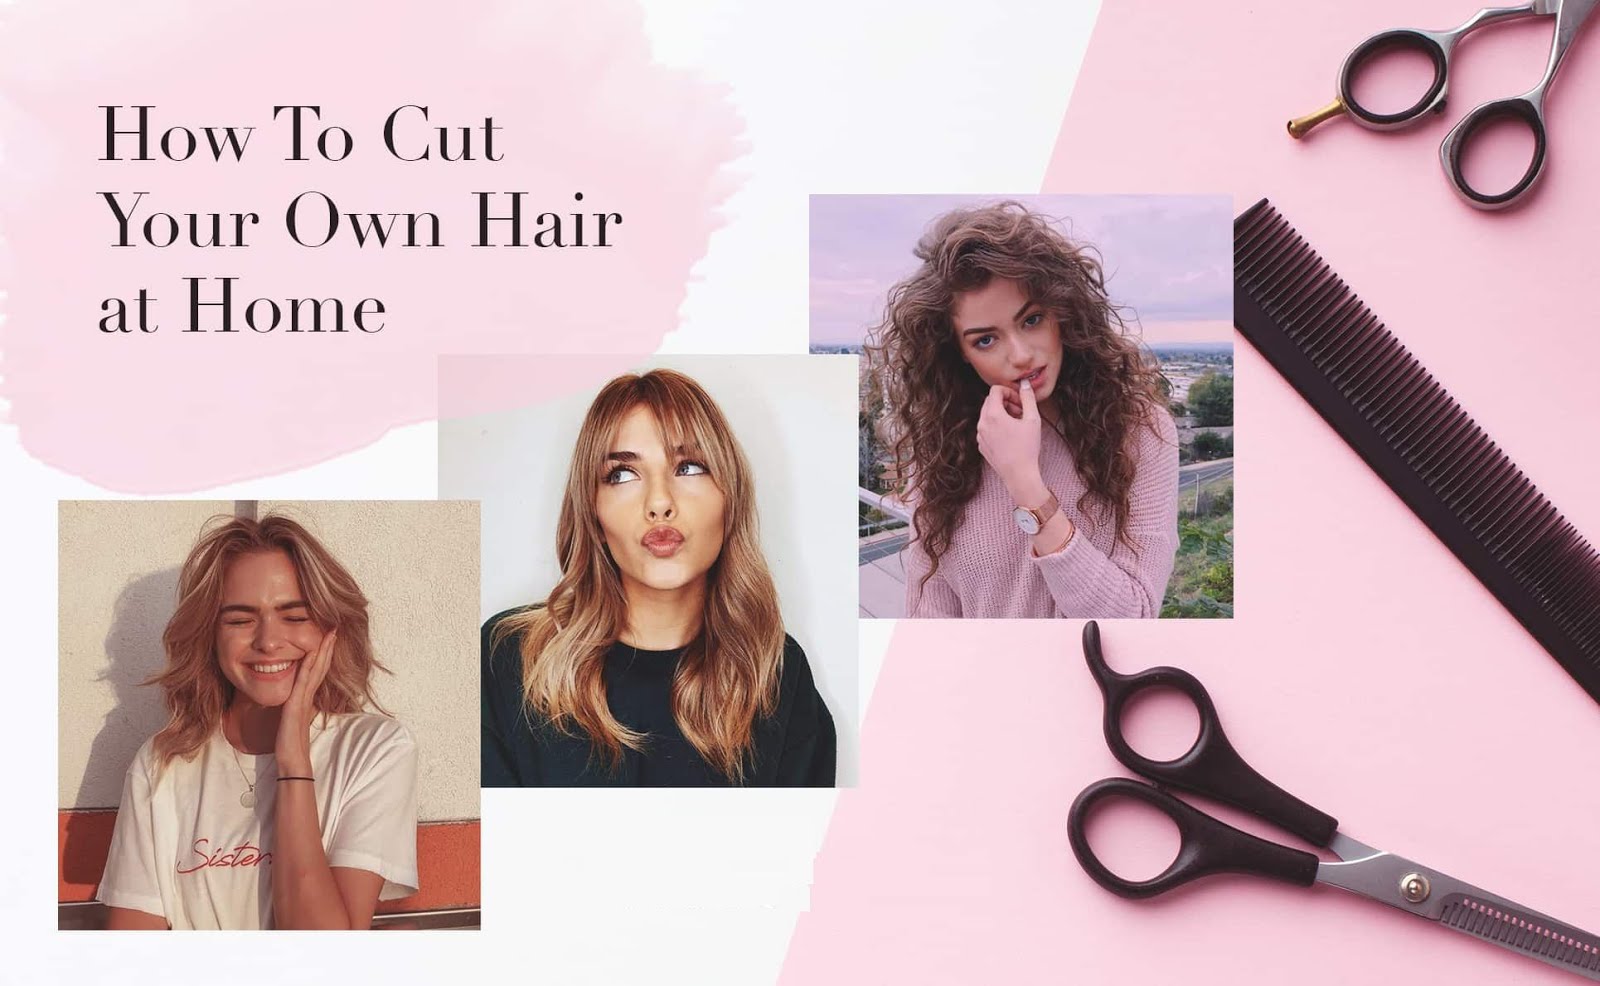 7. How to Cut Your Own Hair at Home - wide 1